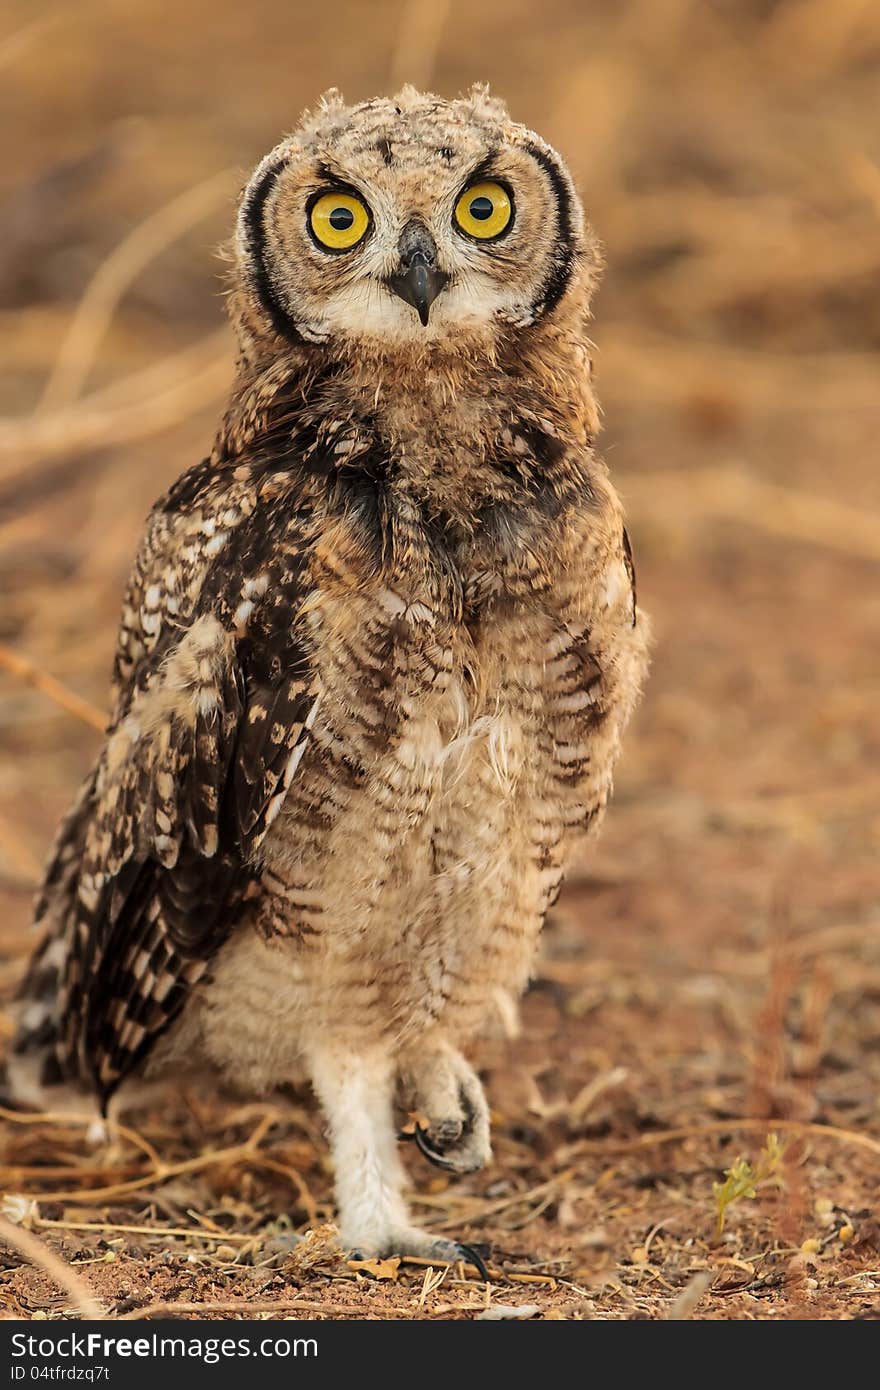 Spotted Eagle Owl in Kgalagadi Transfrontier Park. Spotted Eagle Owl in Kgalagadi Transfrontier Park